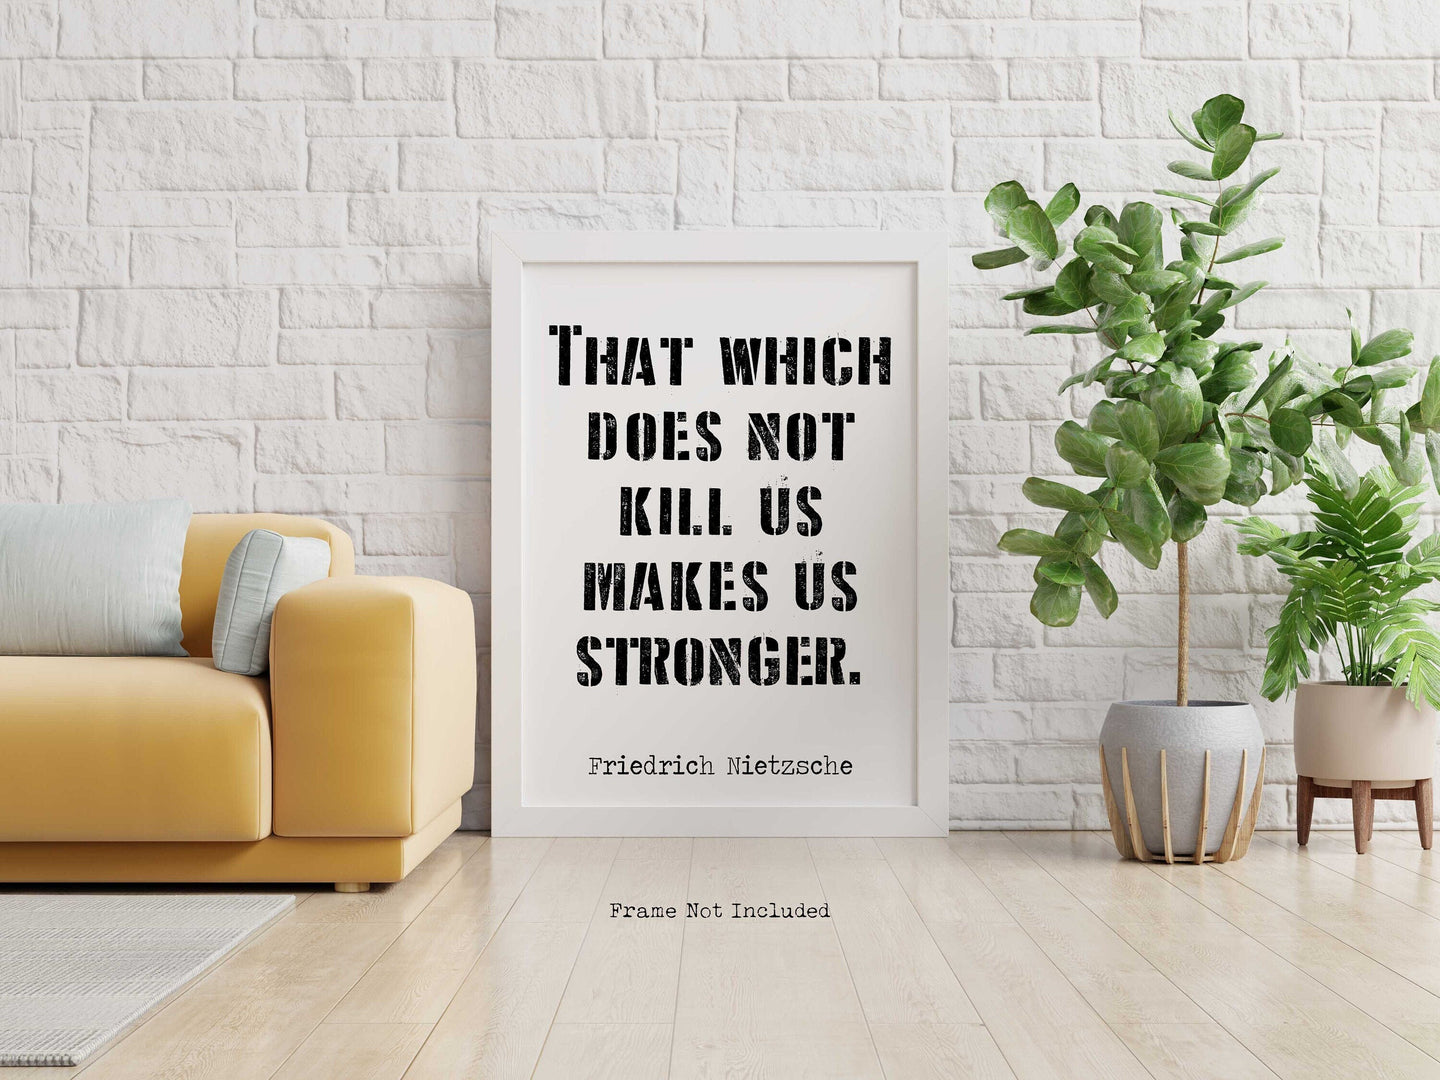 Nietzsche quote - That Which Does Not Kill Us Makes Us Stronger - philosophy print UNFRAMED